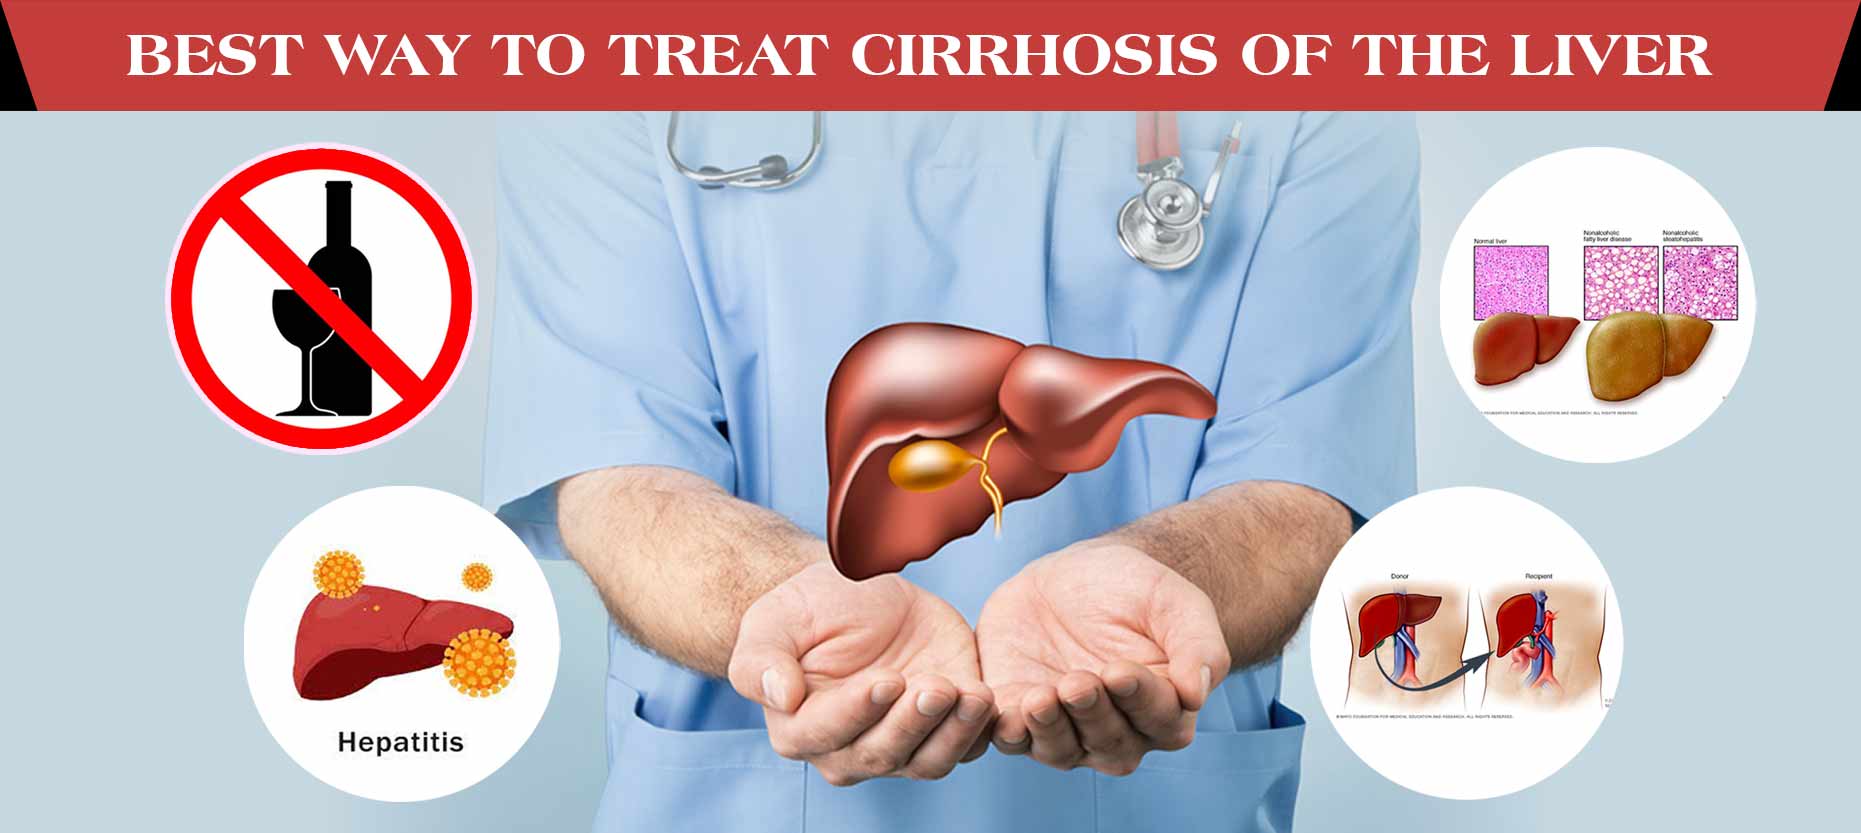 Best Way to Treat Cirrhosis of the Liver